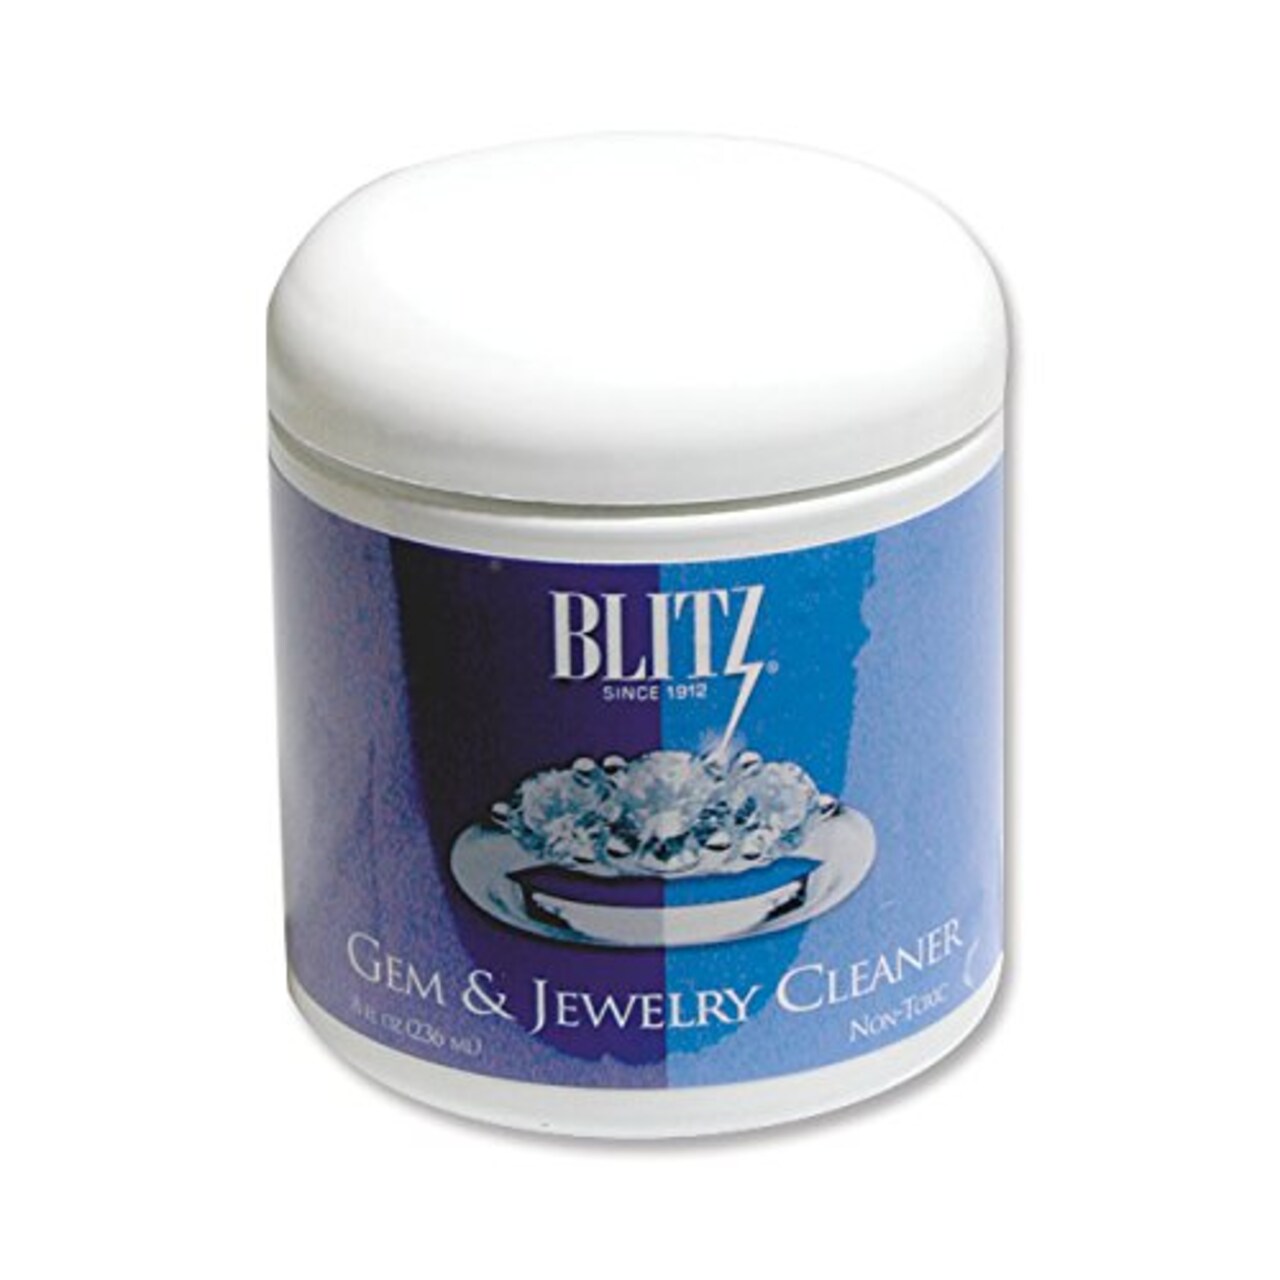 Gem & Jewelry Cleaner Dip (Just Dip and Clean Jewelry)